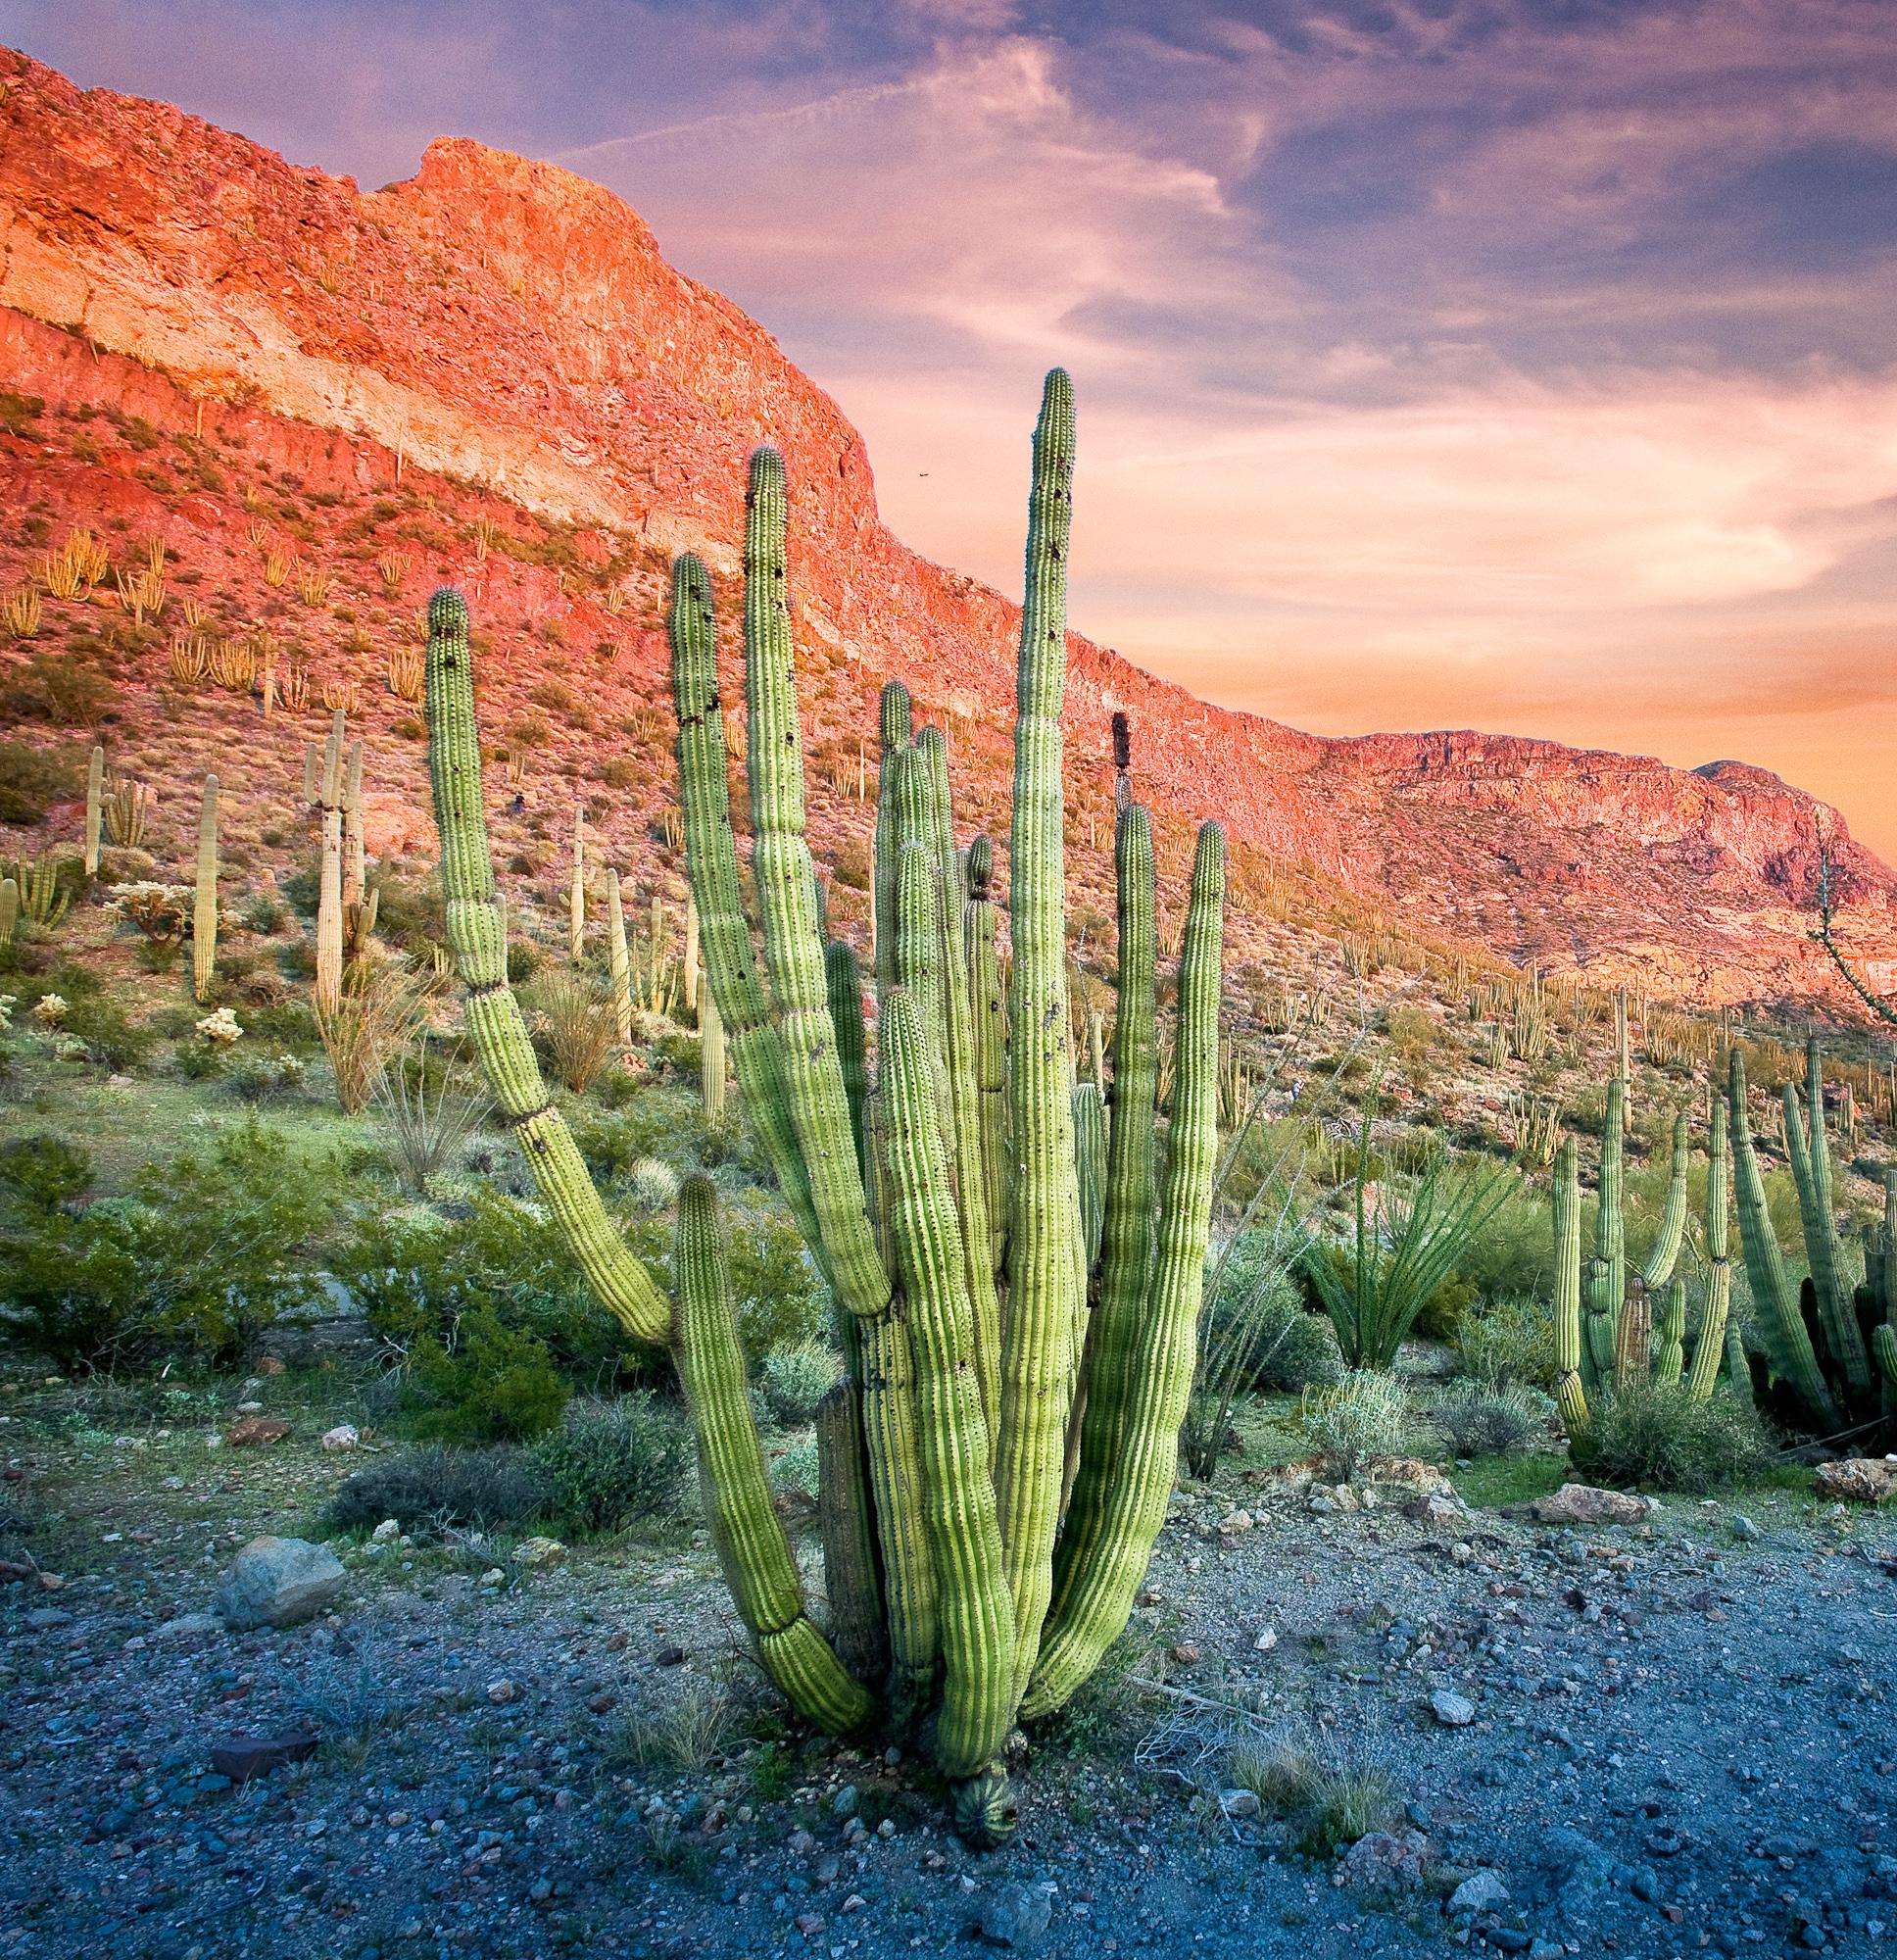 Organ pipe cactus and mountains at sunset